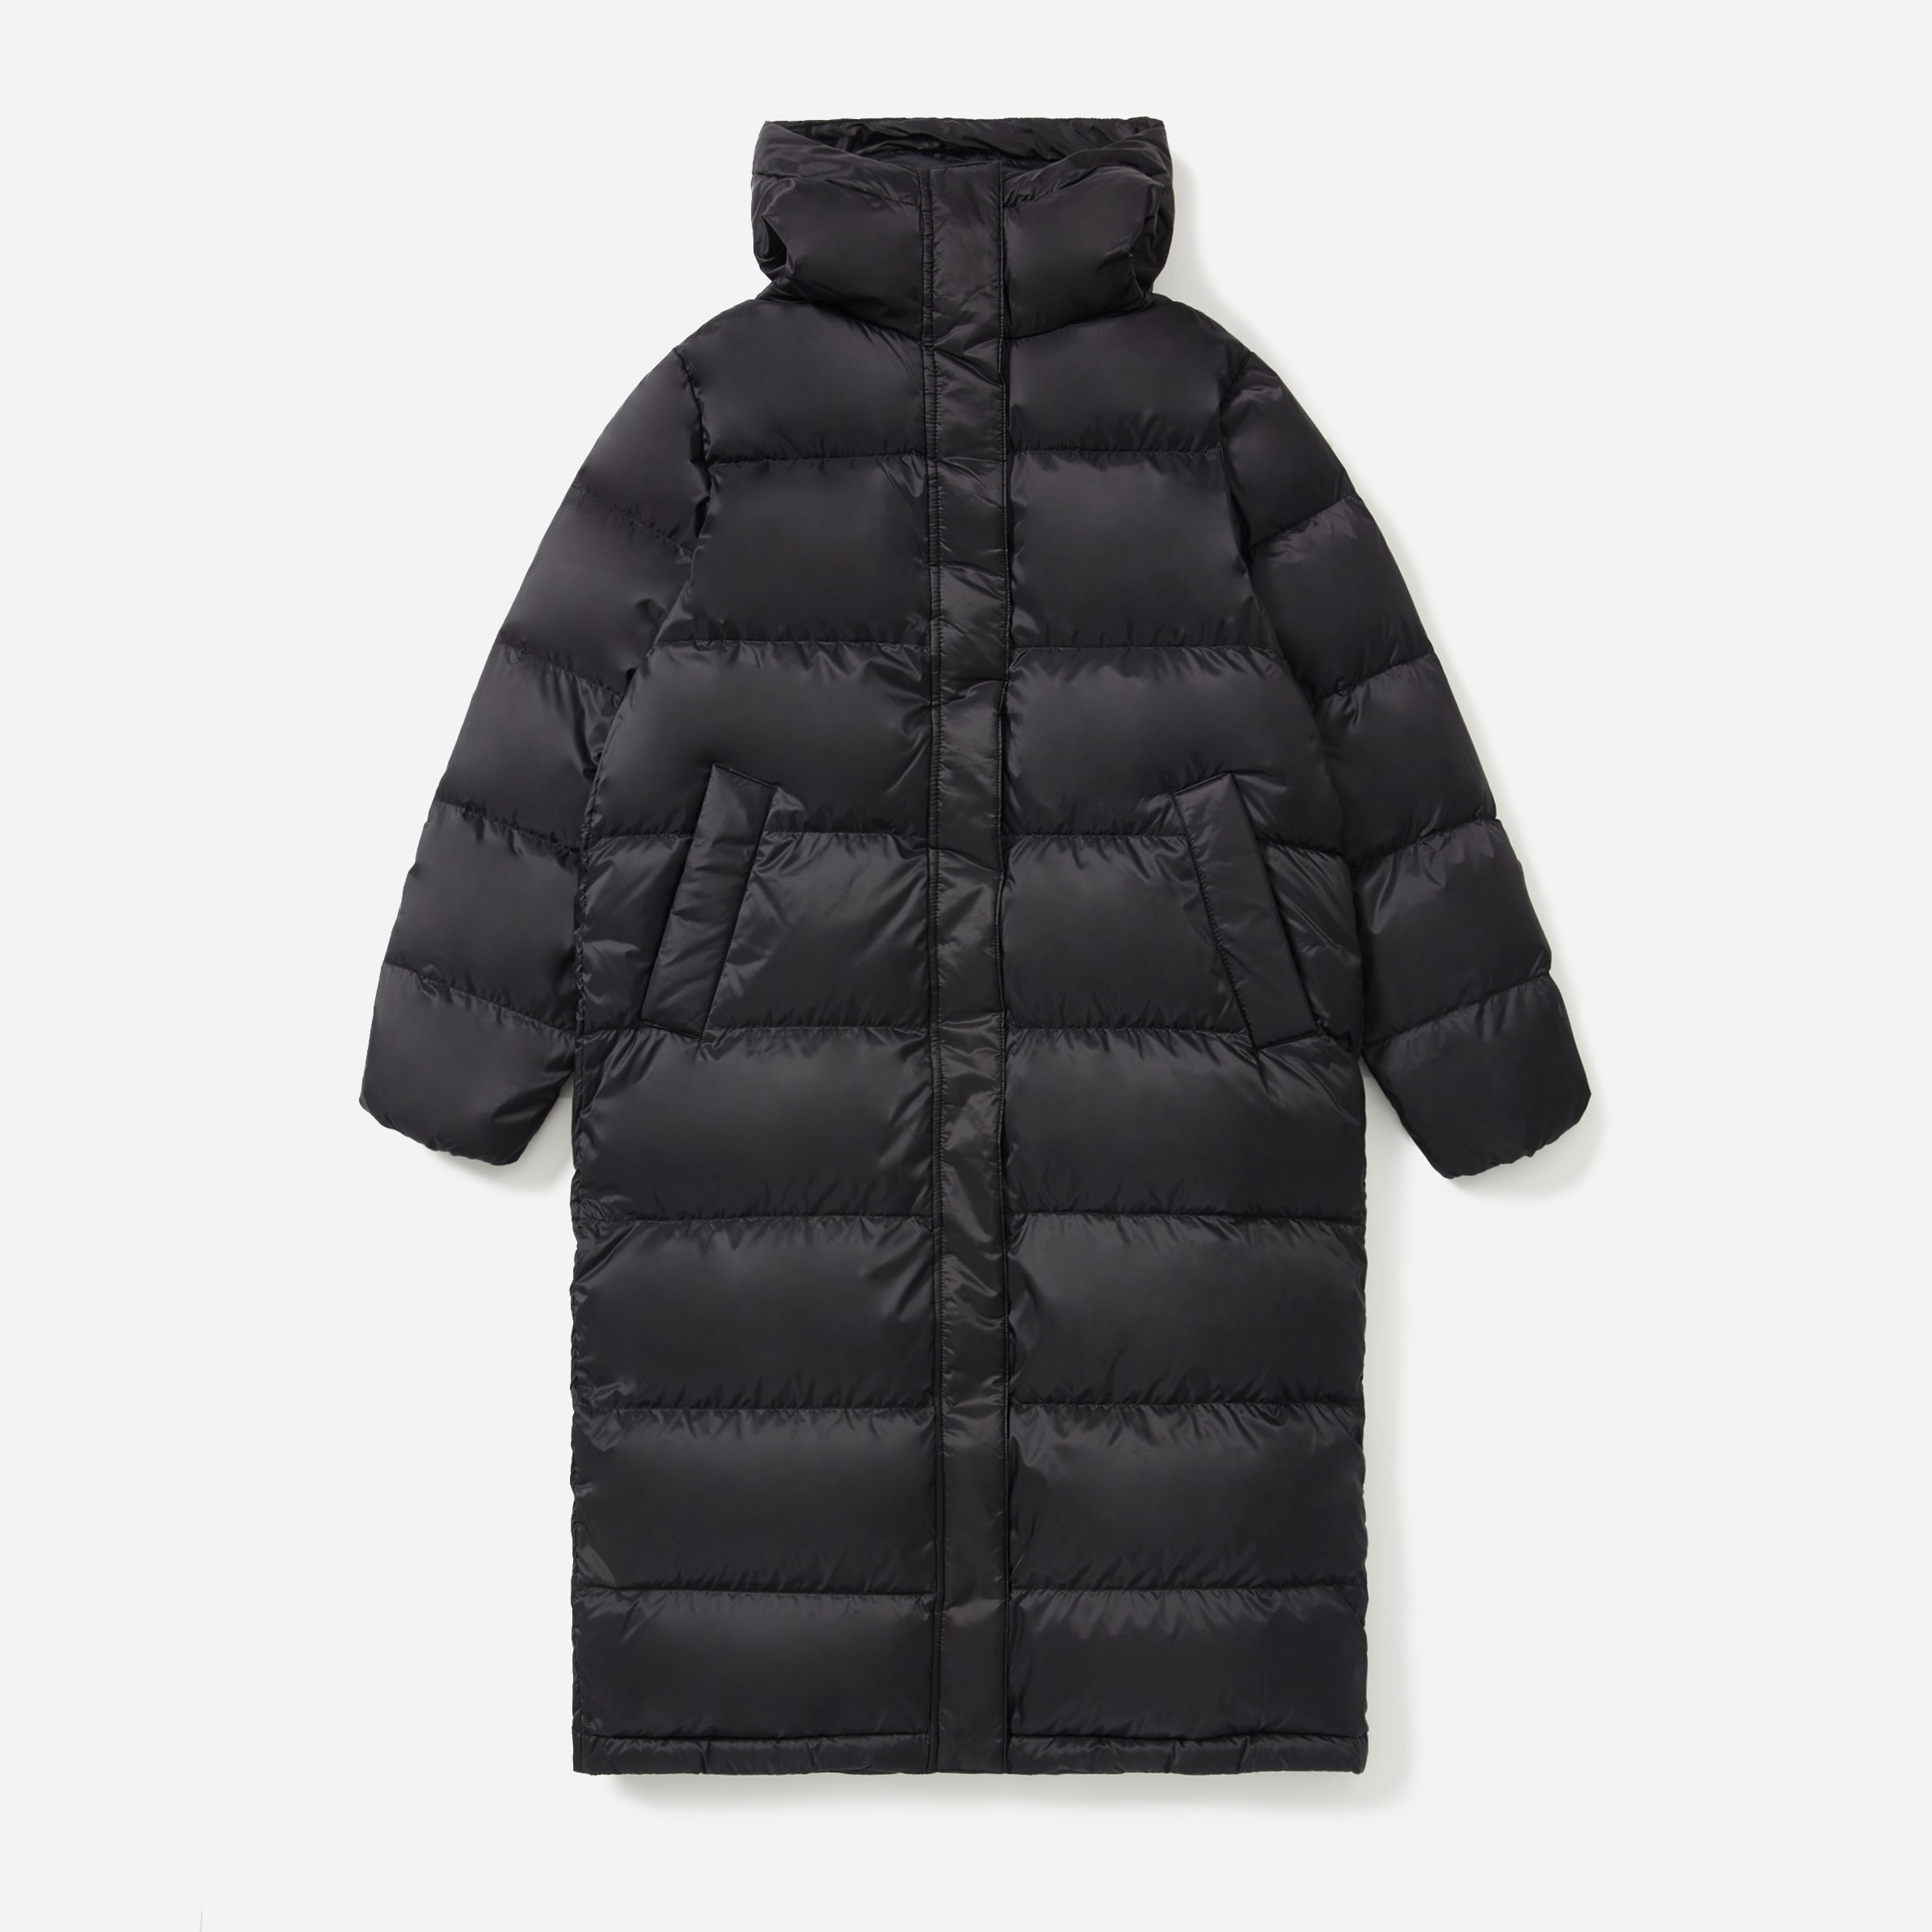 The Best Sleeping-Bag Coats to Invest in Right Now